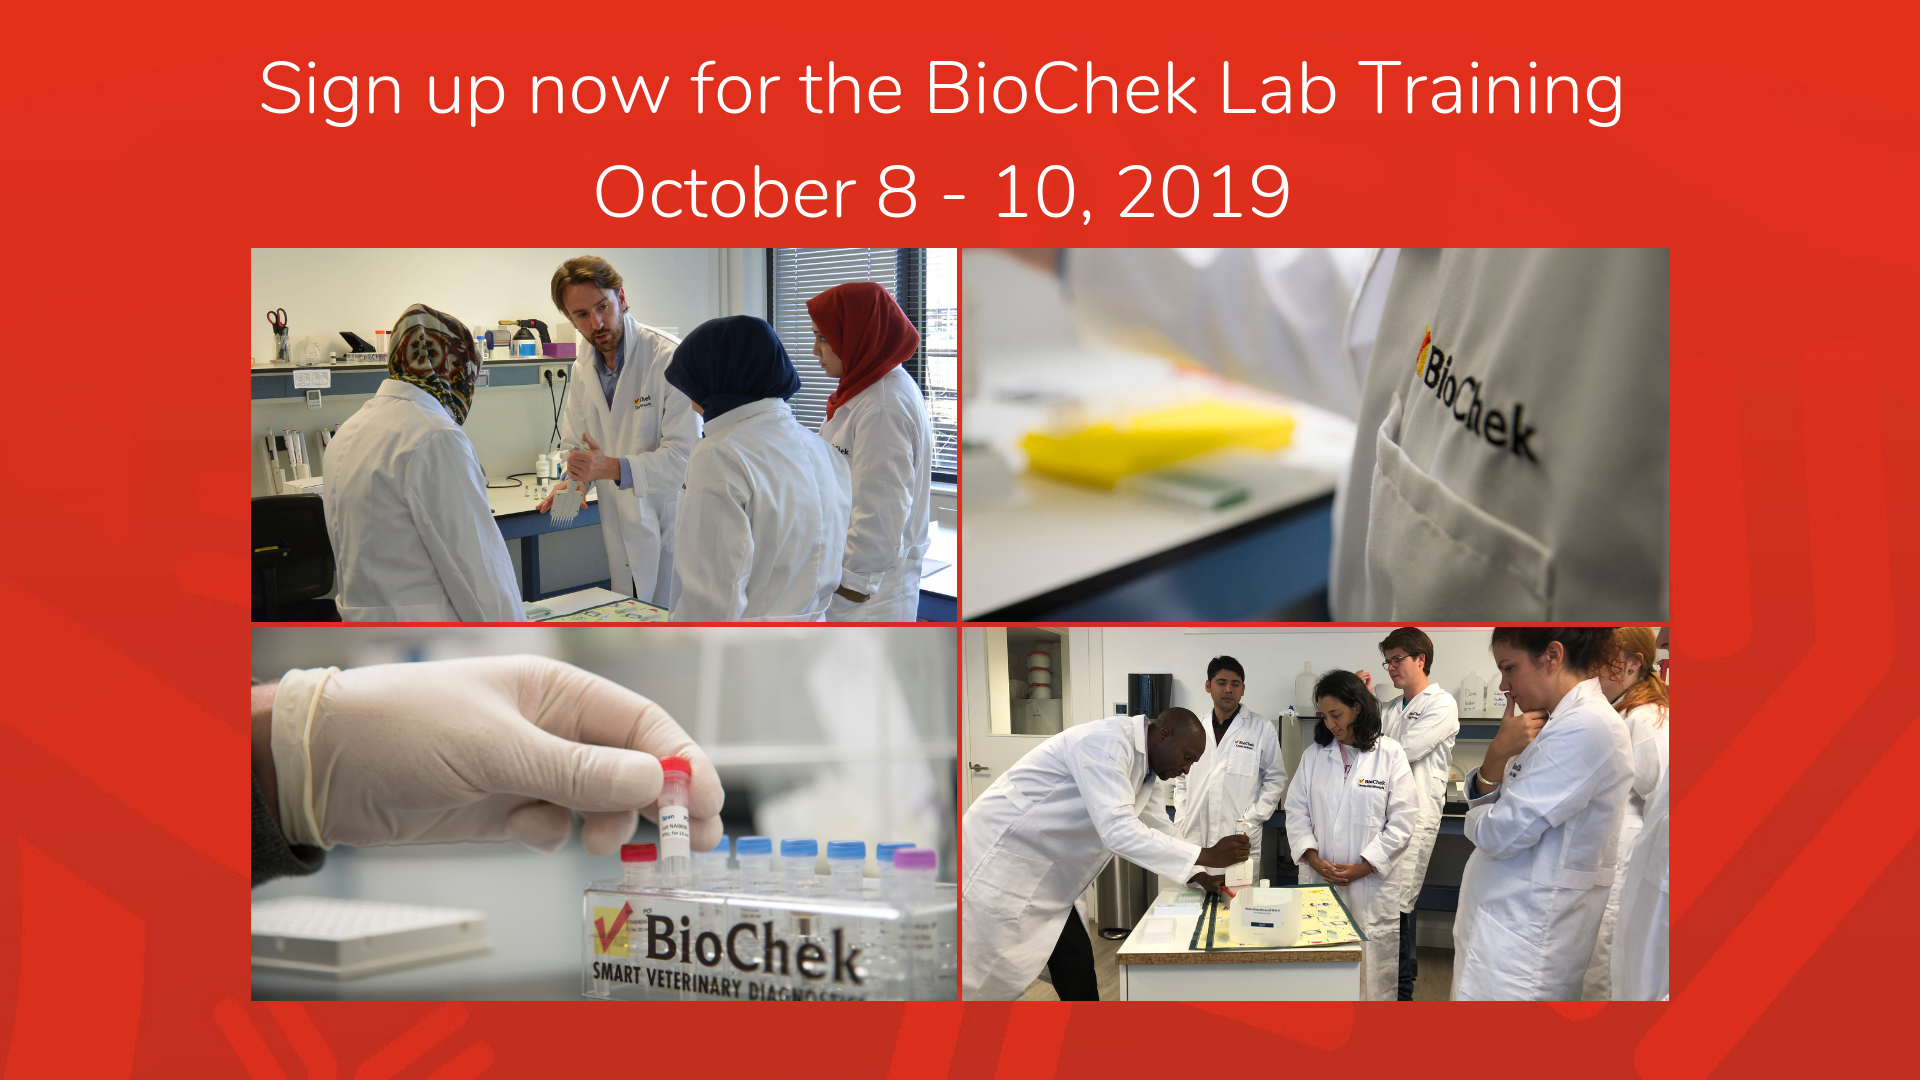 [CLOSED] Open for sign up: BioChek Lab Training October 2019